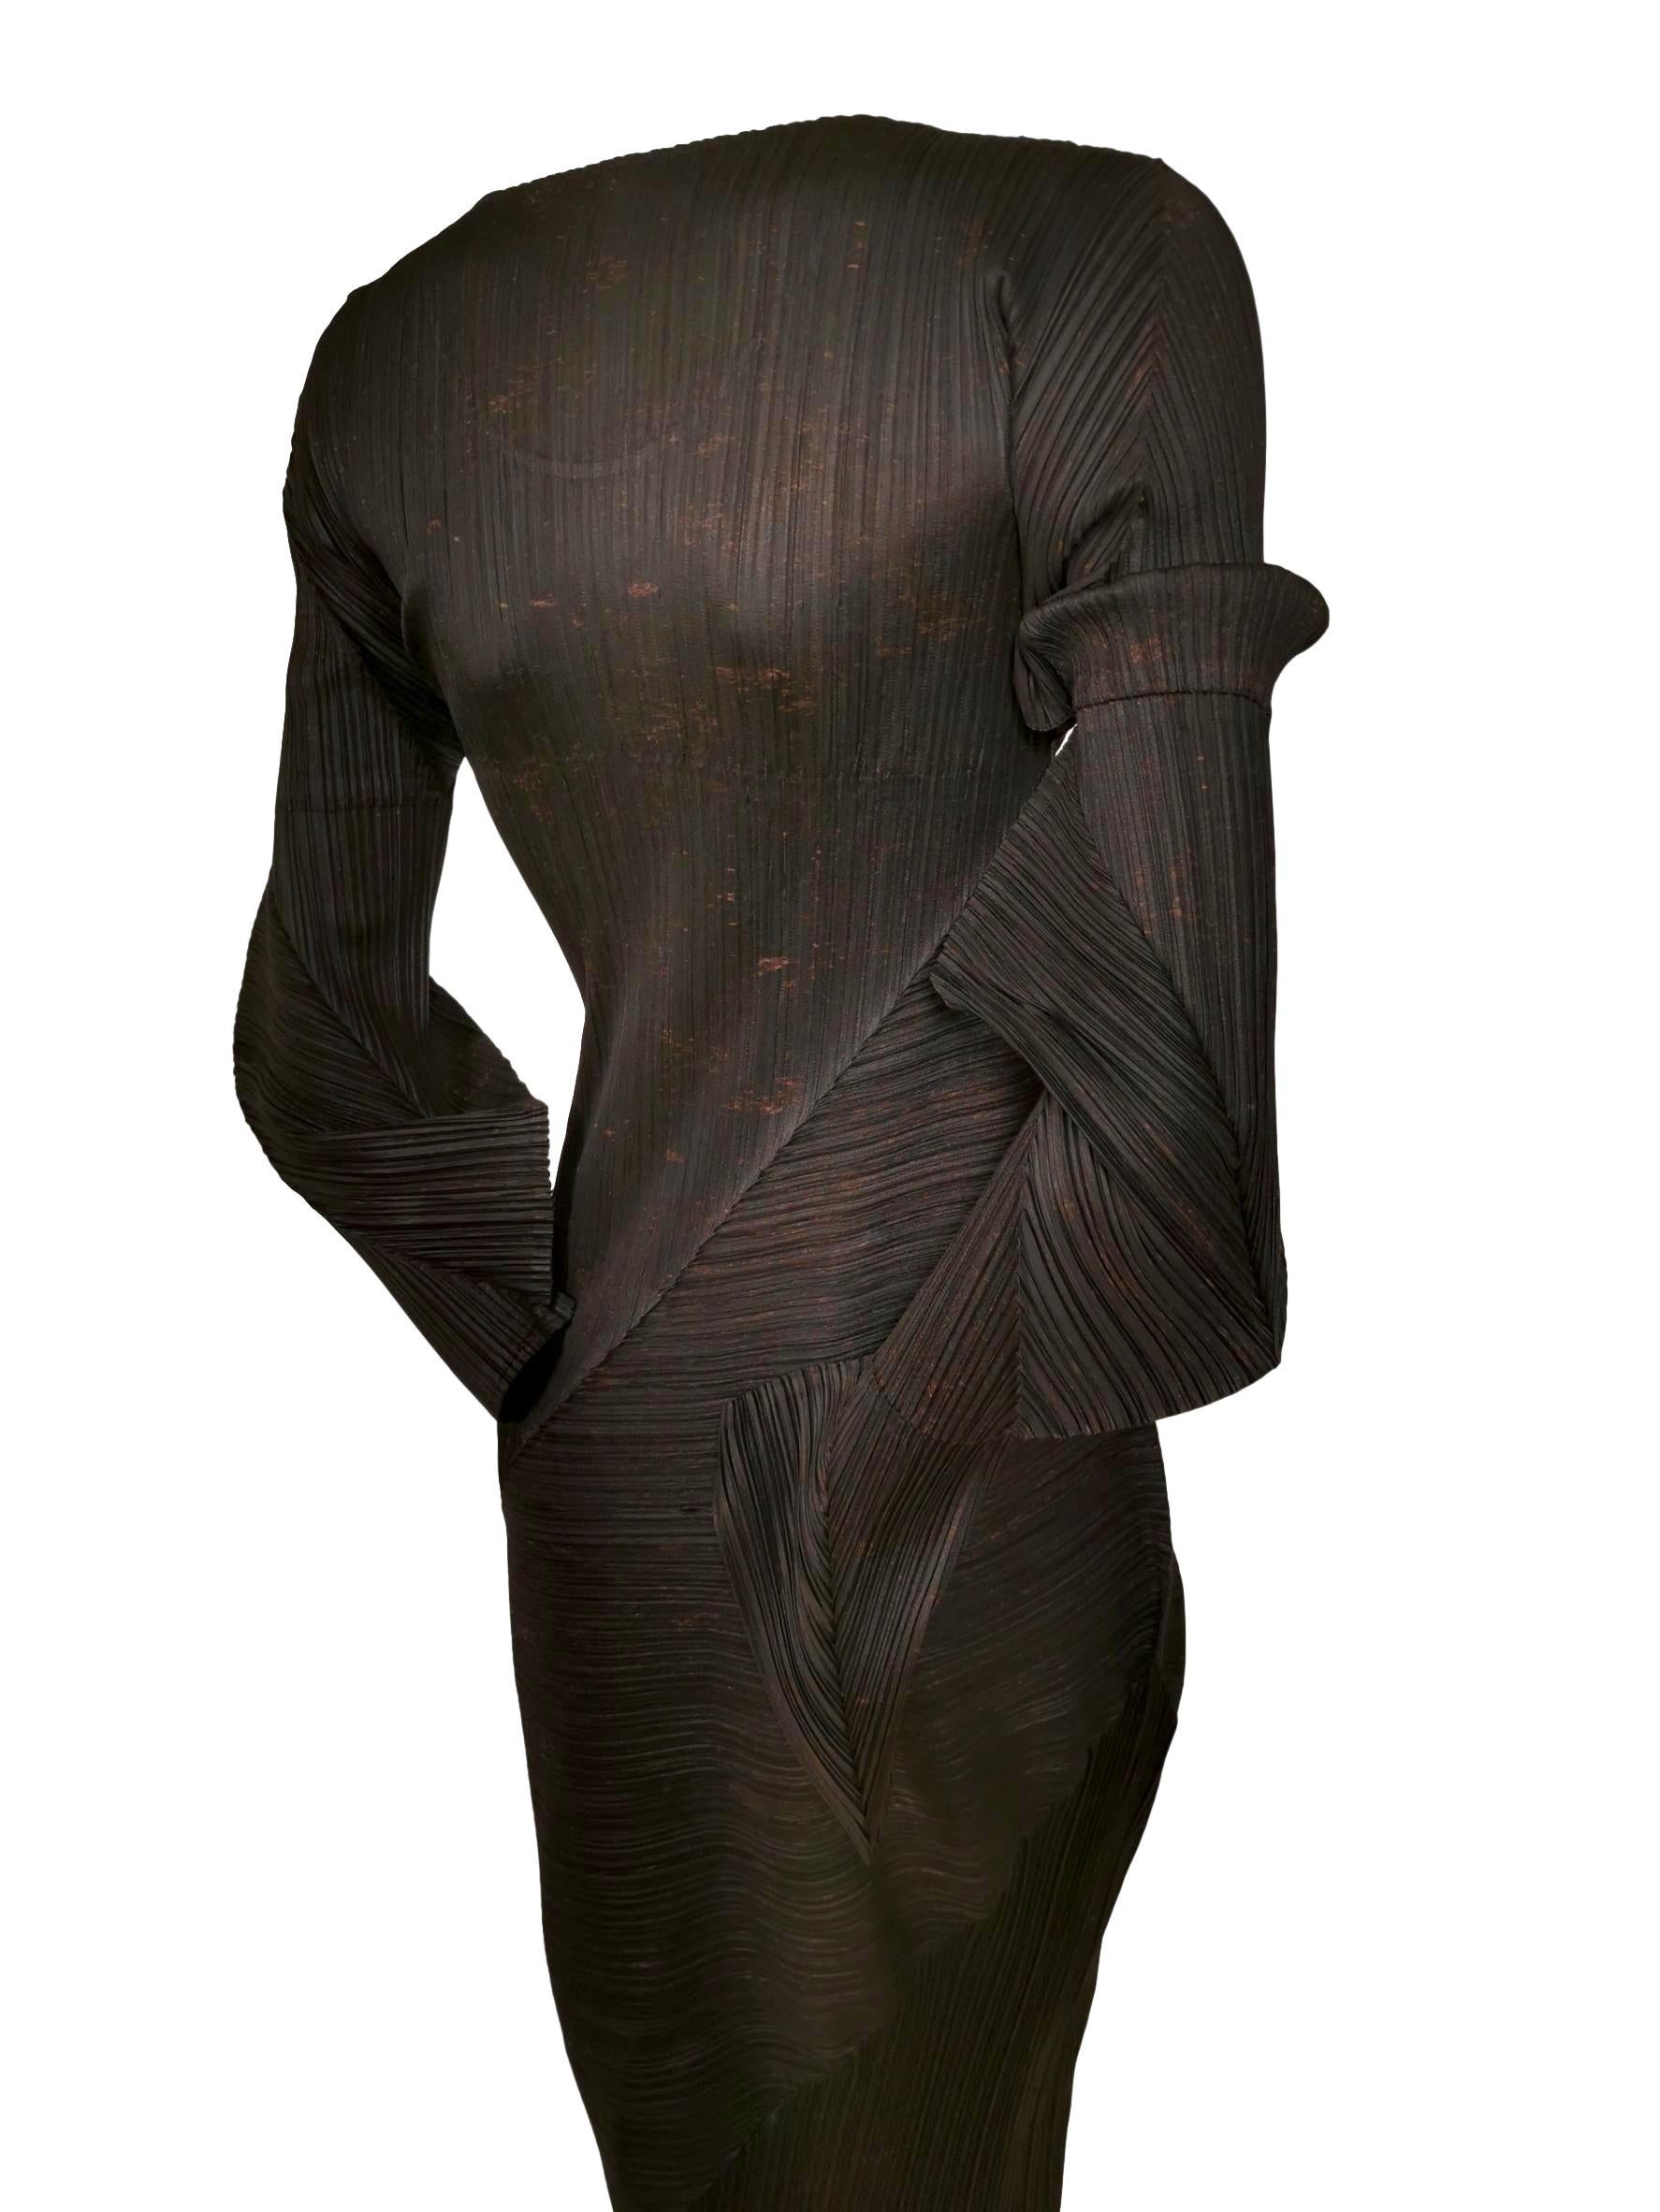 Issey Miyake Guest Artist Cai Guo Qiang Series Number 4 Serpentine Dress In Excellent Condition For Sale In Bath, GB